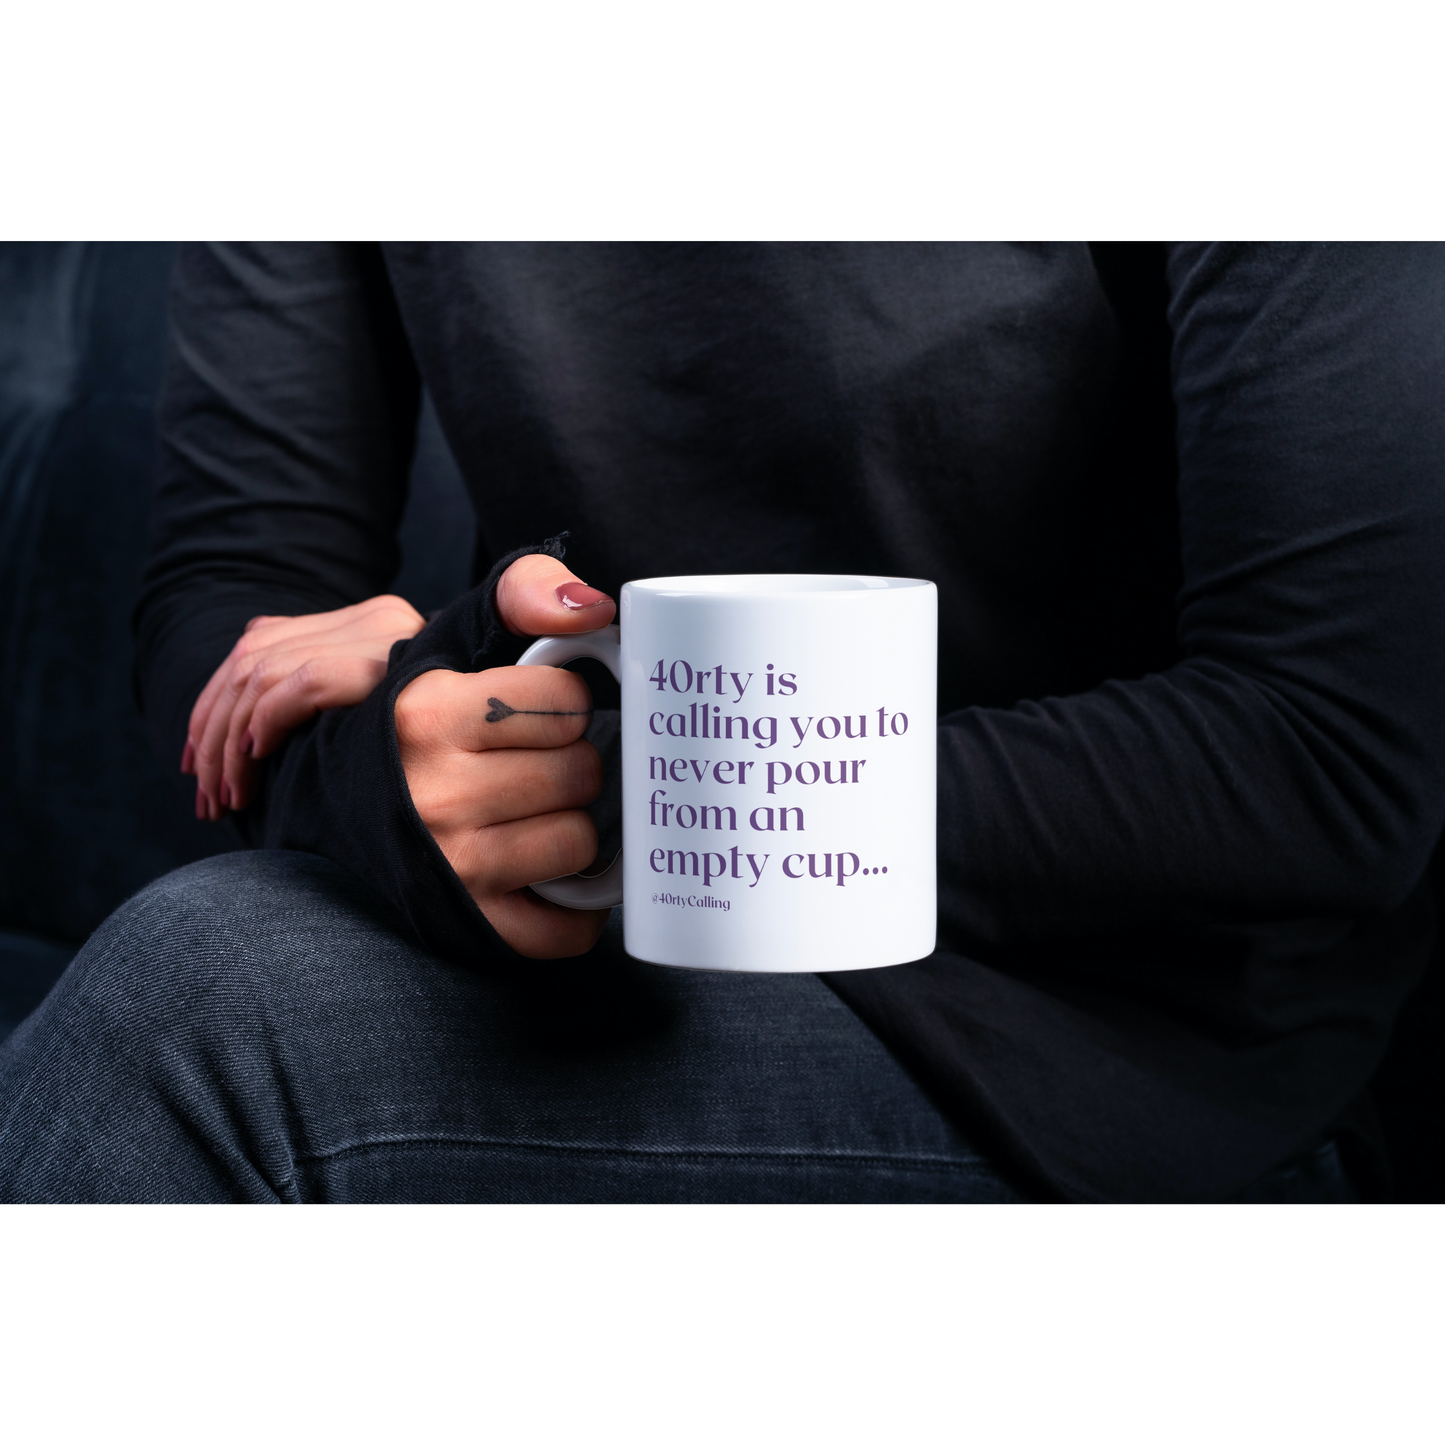 40rty is Calling ~ Never Pour From An Empty Cup 11 oz Mug